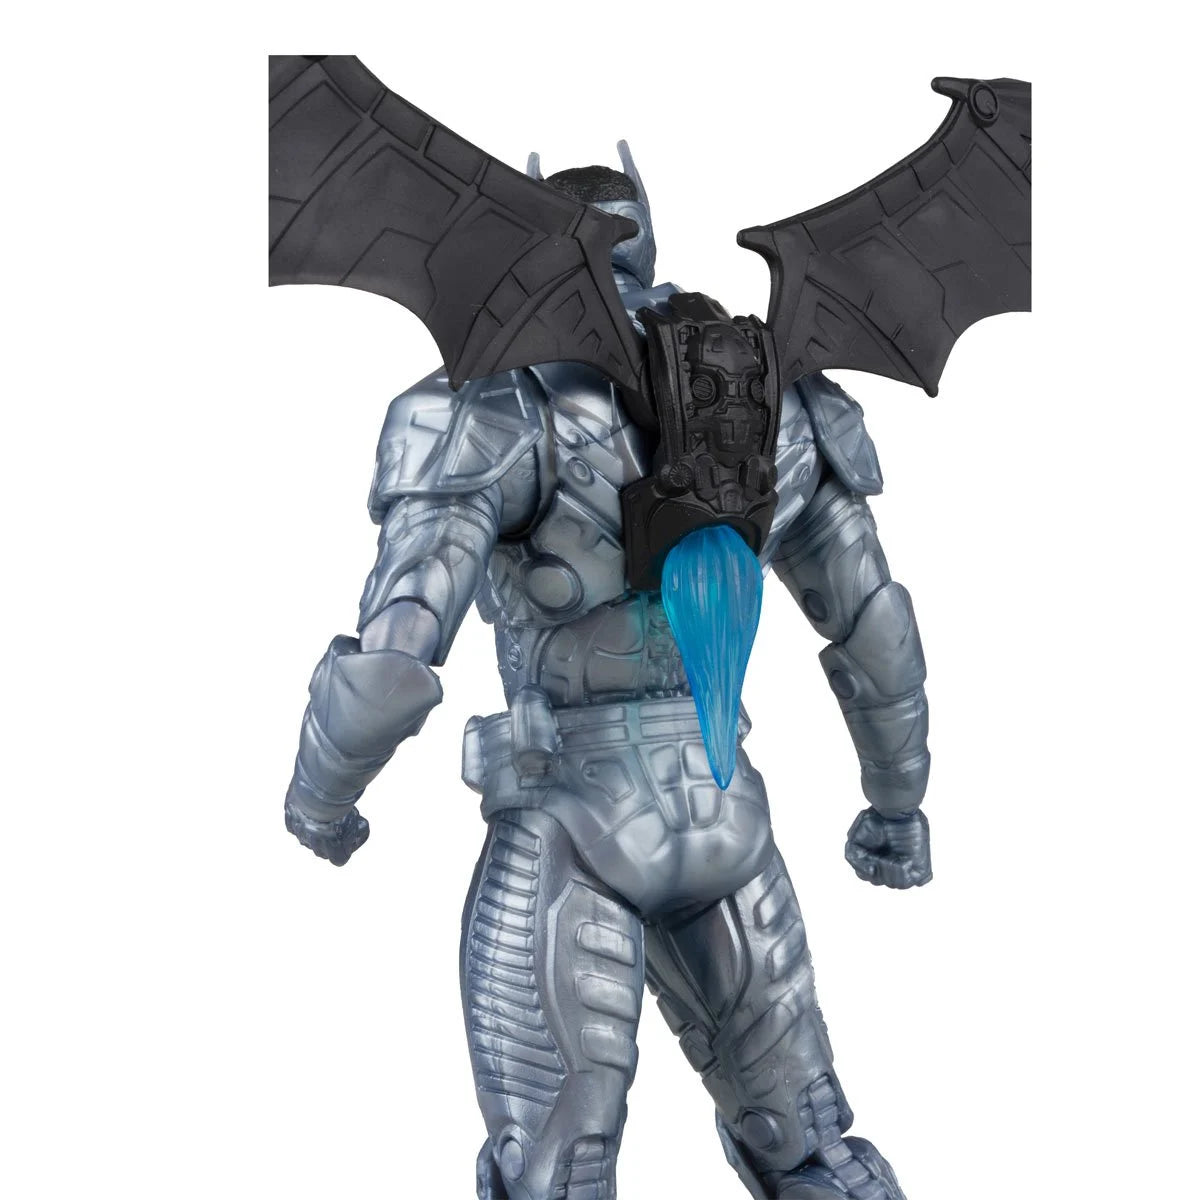 Back View of Batwing New 52 7-Inch Scale Action Figure - Heretoserveyou